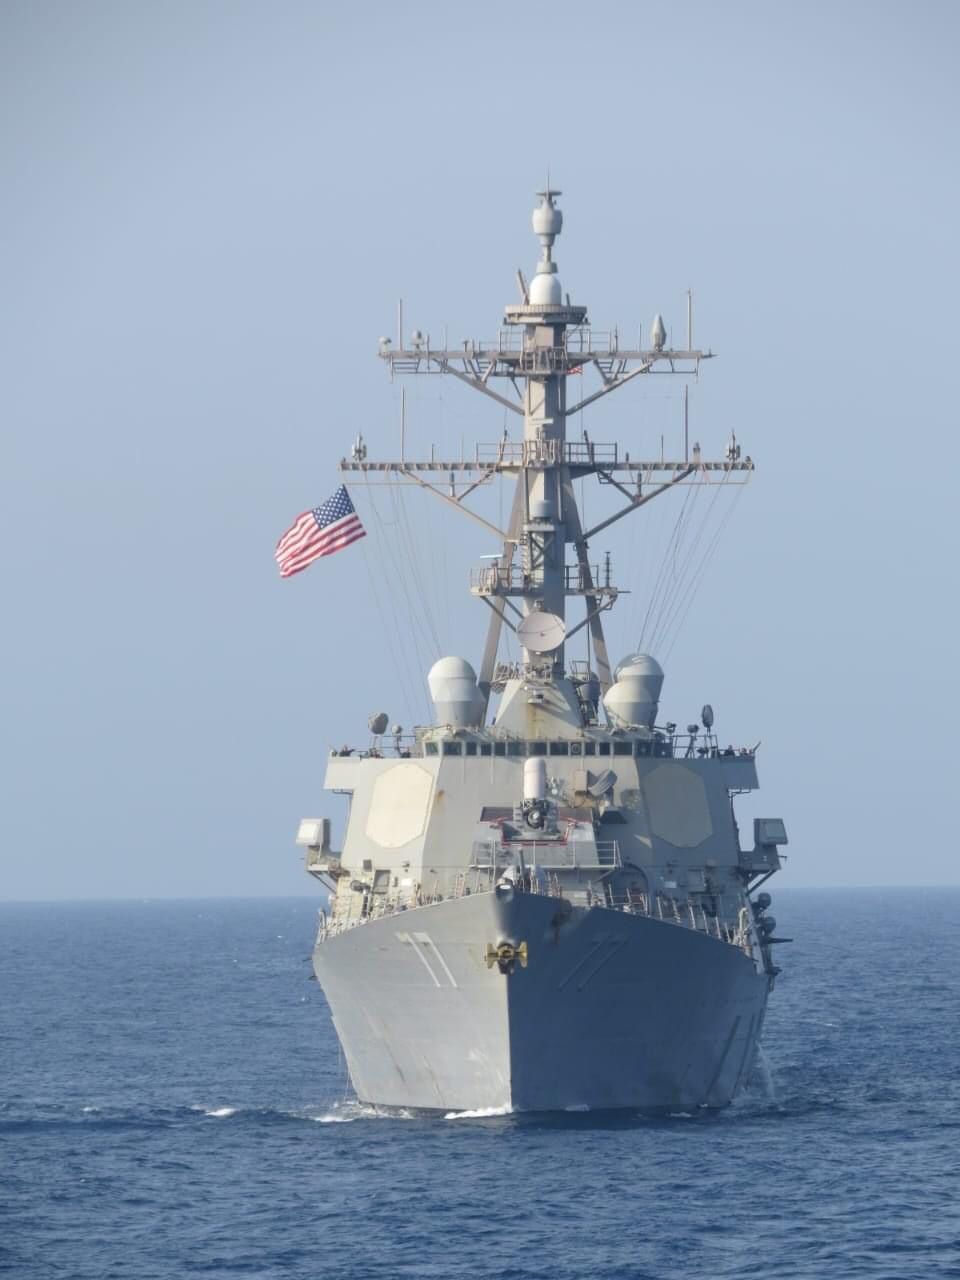 U.S. destroyer participating in exercises with Egyptian Navy in the Red Sea in October 2021. Press Photo